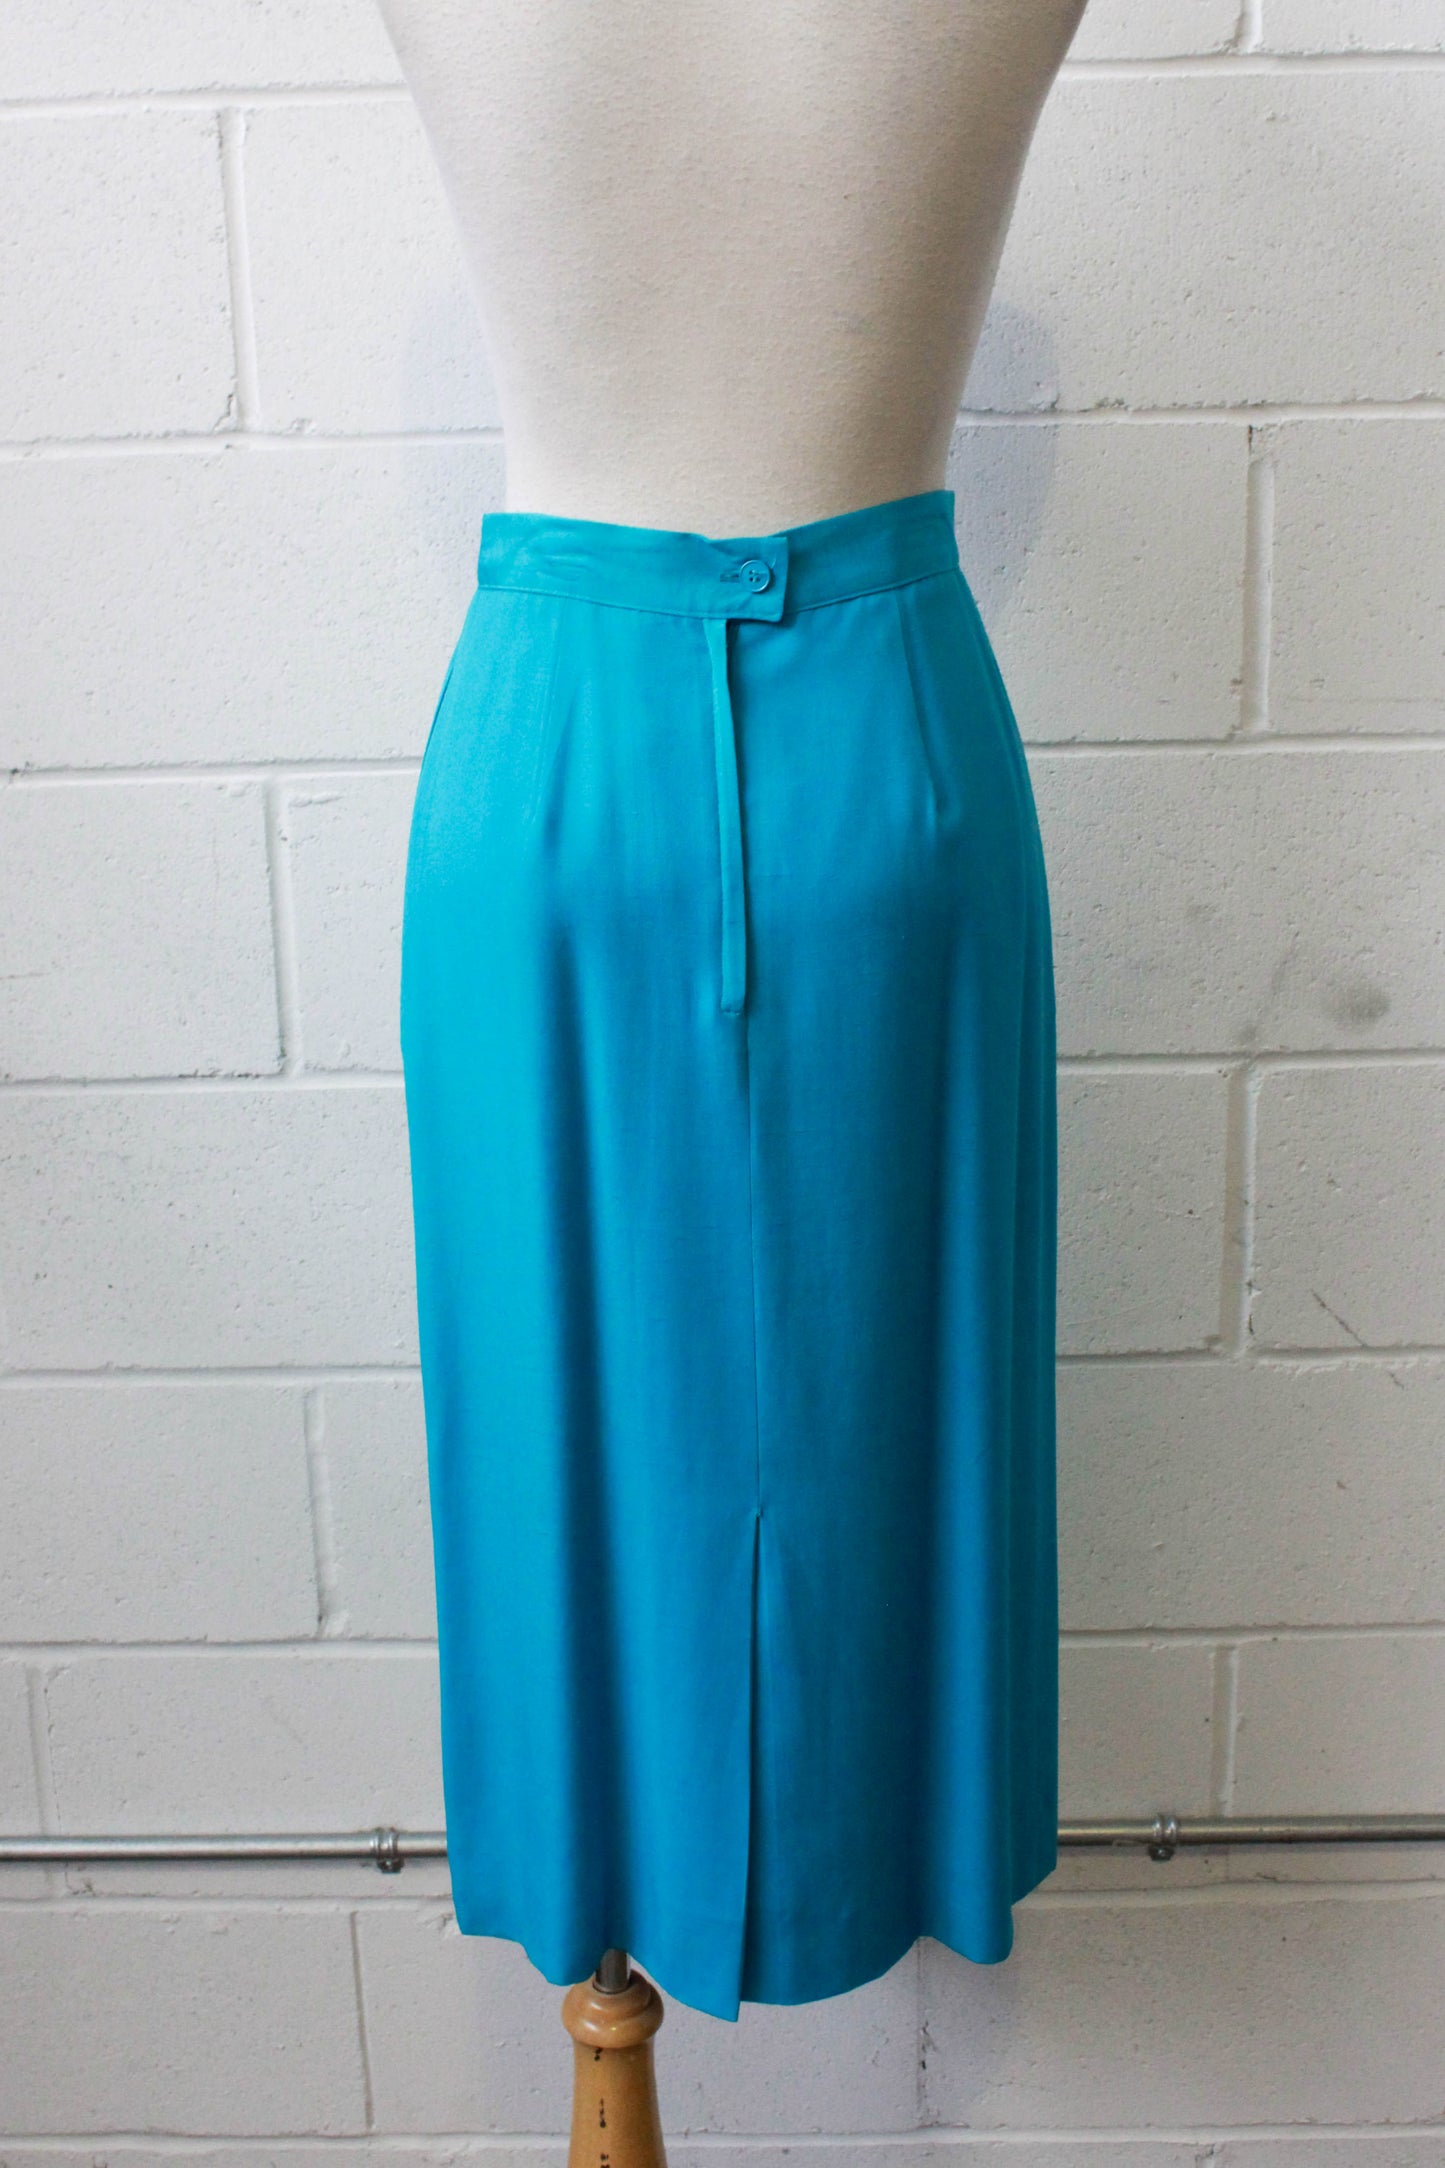 1980s Turquoise Pencil Skirt with Pleat Detail, Waist 26"